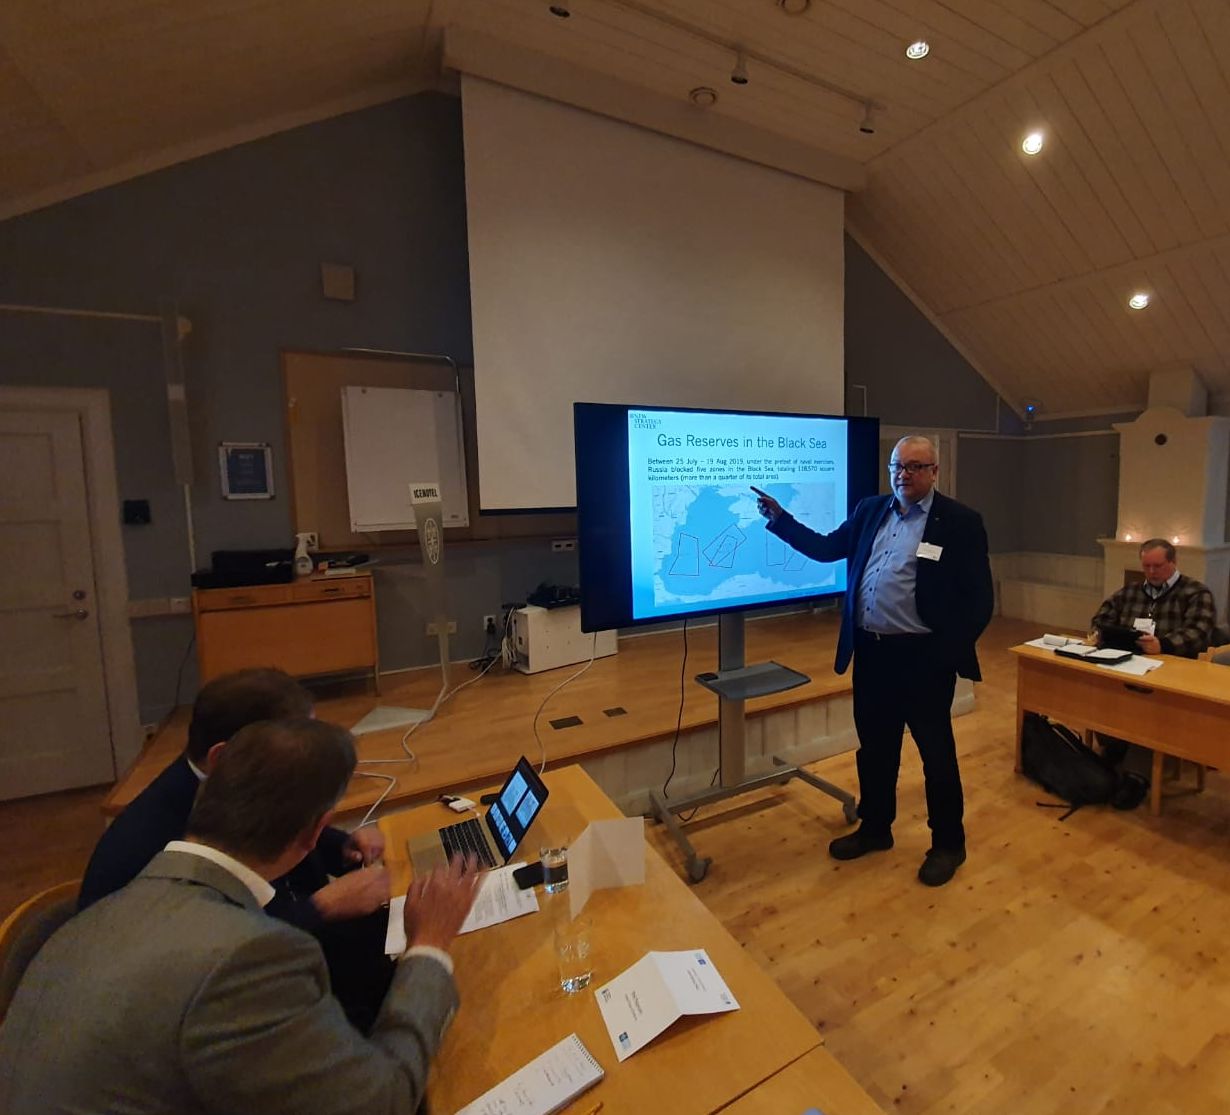 NSC at the conference “European-American Security Dialog”, in Sweden